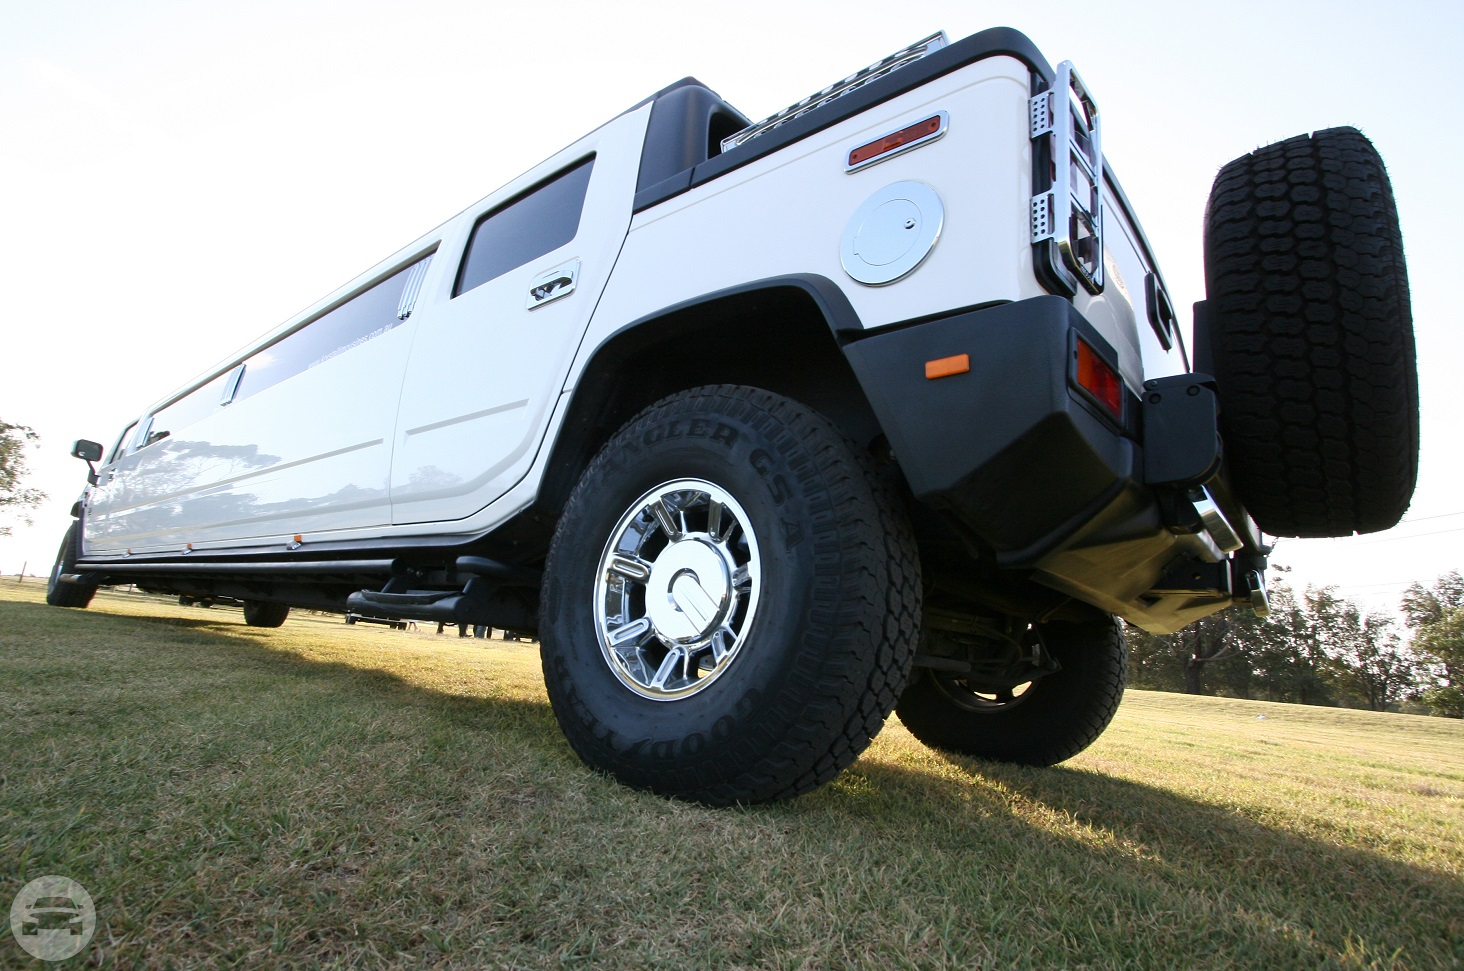 16 seater H2 Hummer White
Limo /
Hoppers Crossing VIC 3029, Australia

 / Hourly AUD$ 500.00
